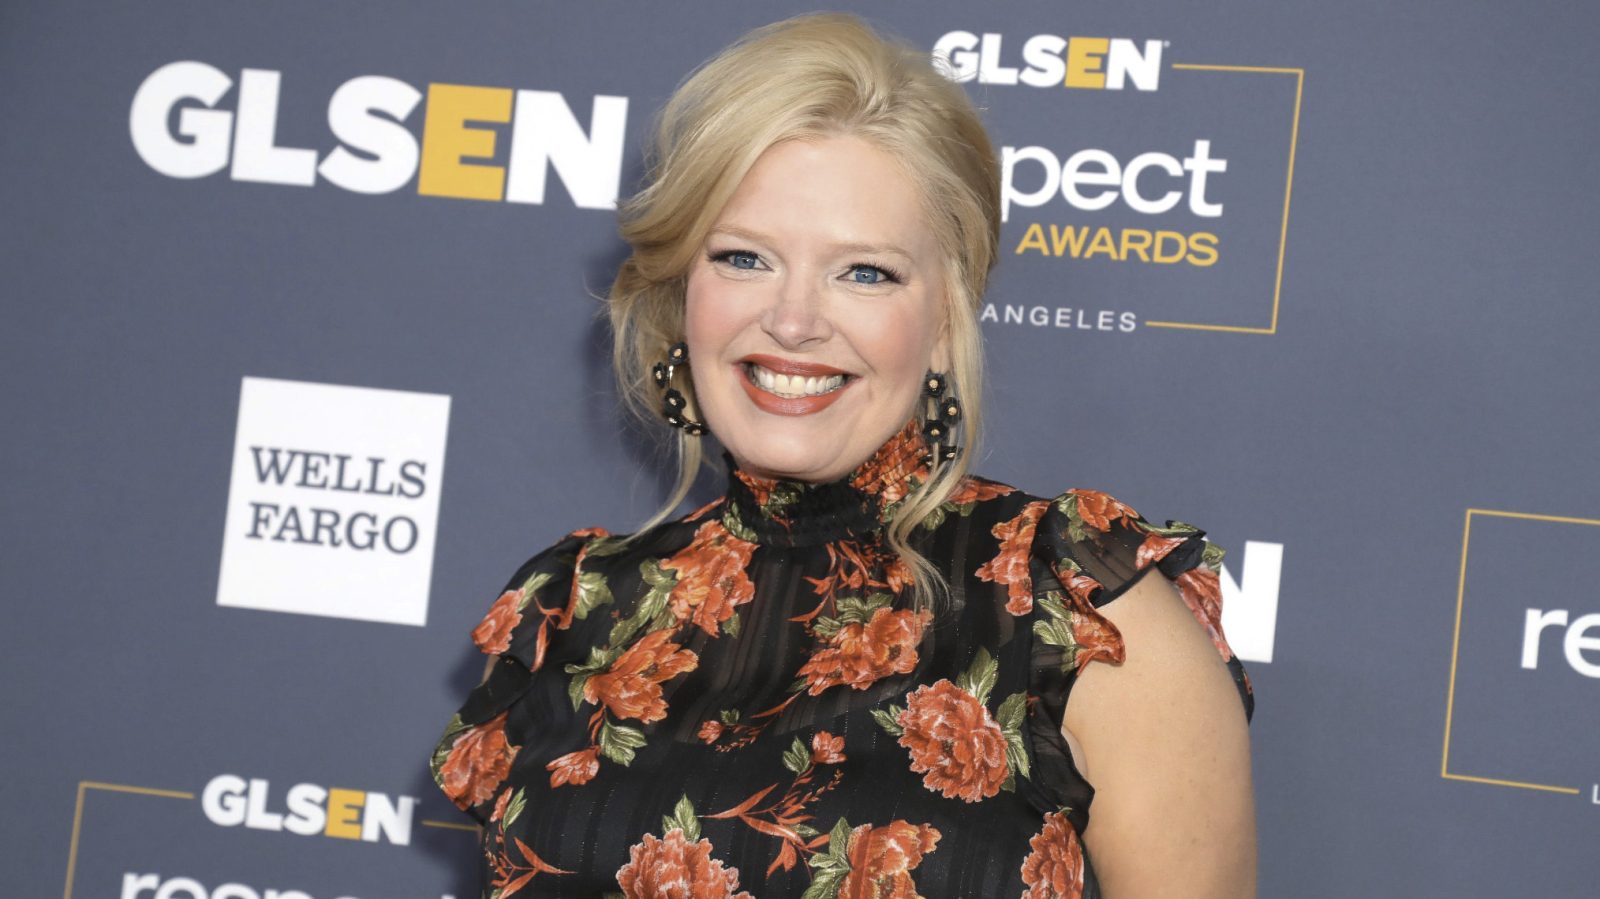 Melissa Peterman Biography Height Weight Age Movies Husband Family Salary Net Worth Facts More